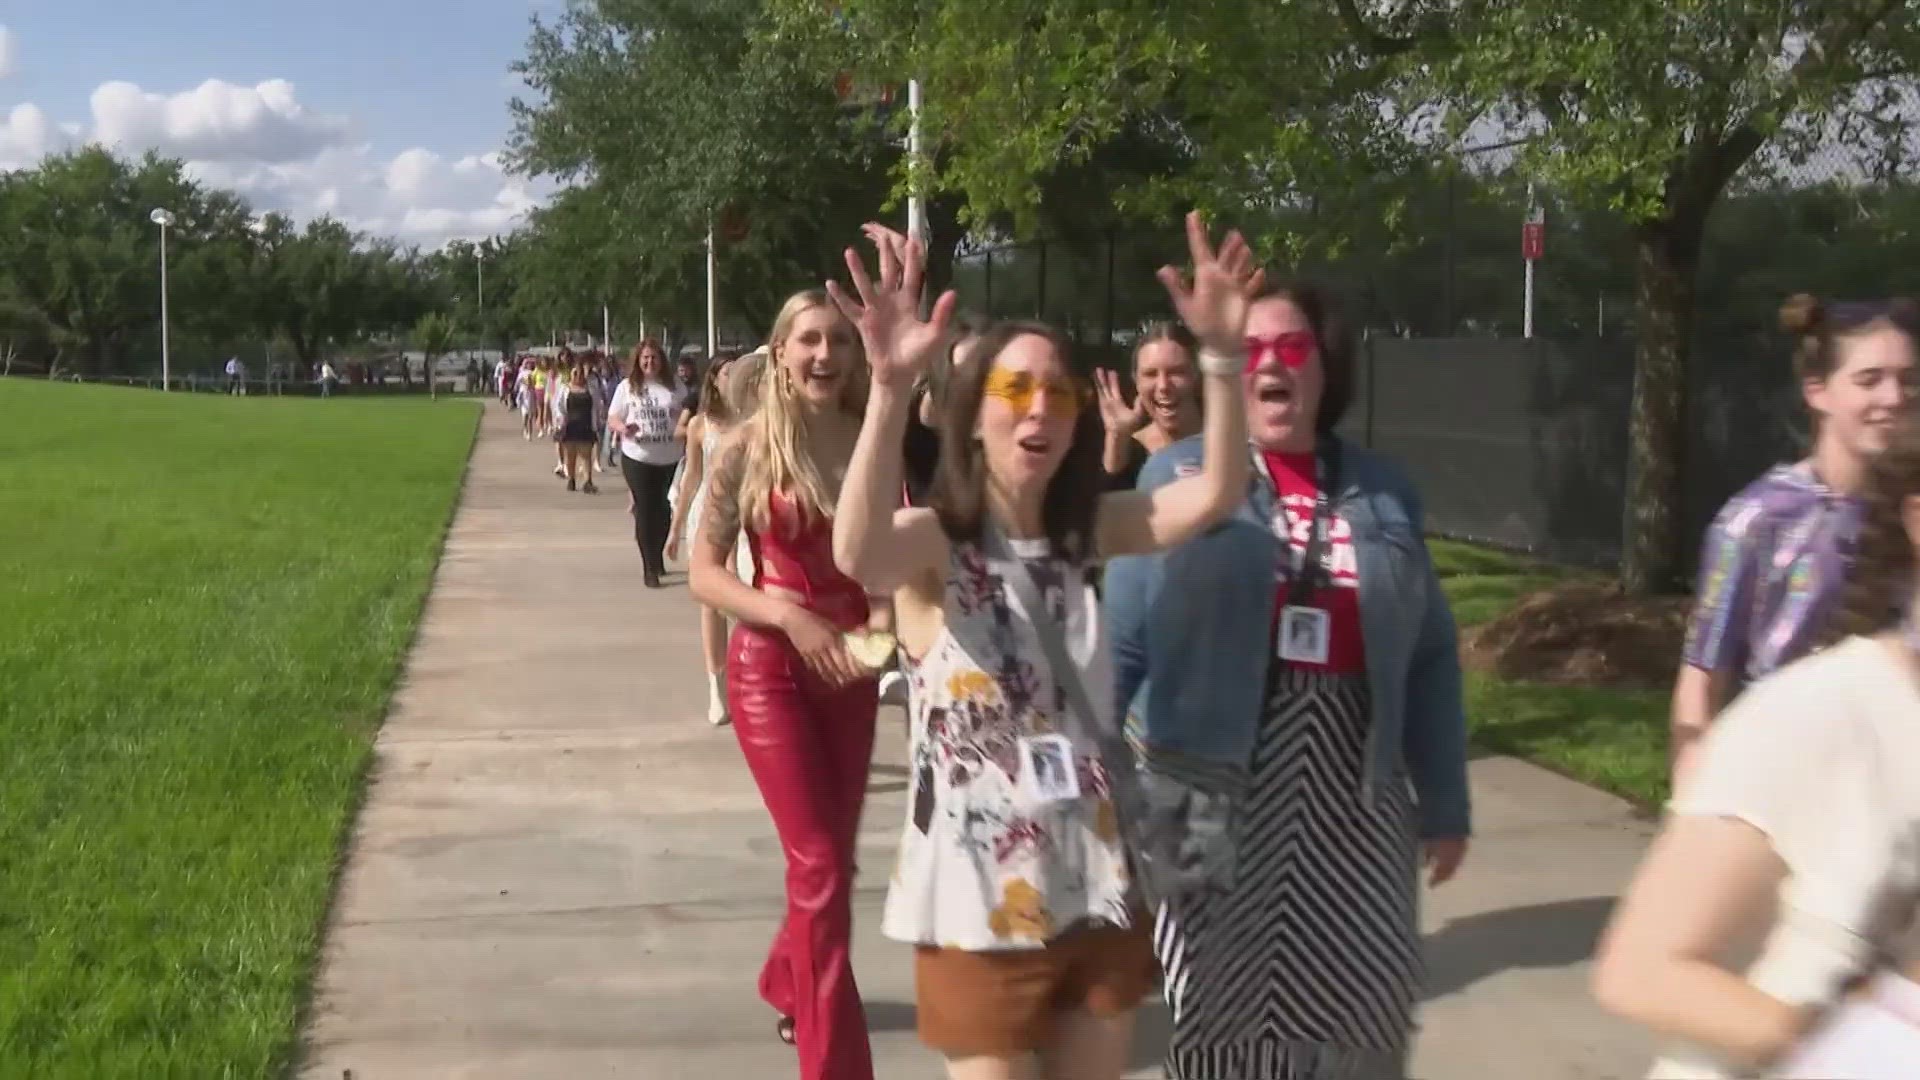 Taylor Swift concert in Houston draws tens of thousands of fans